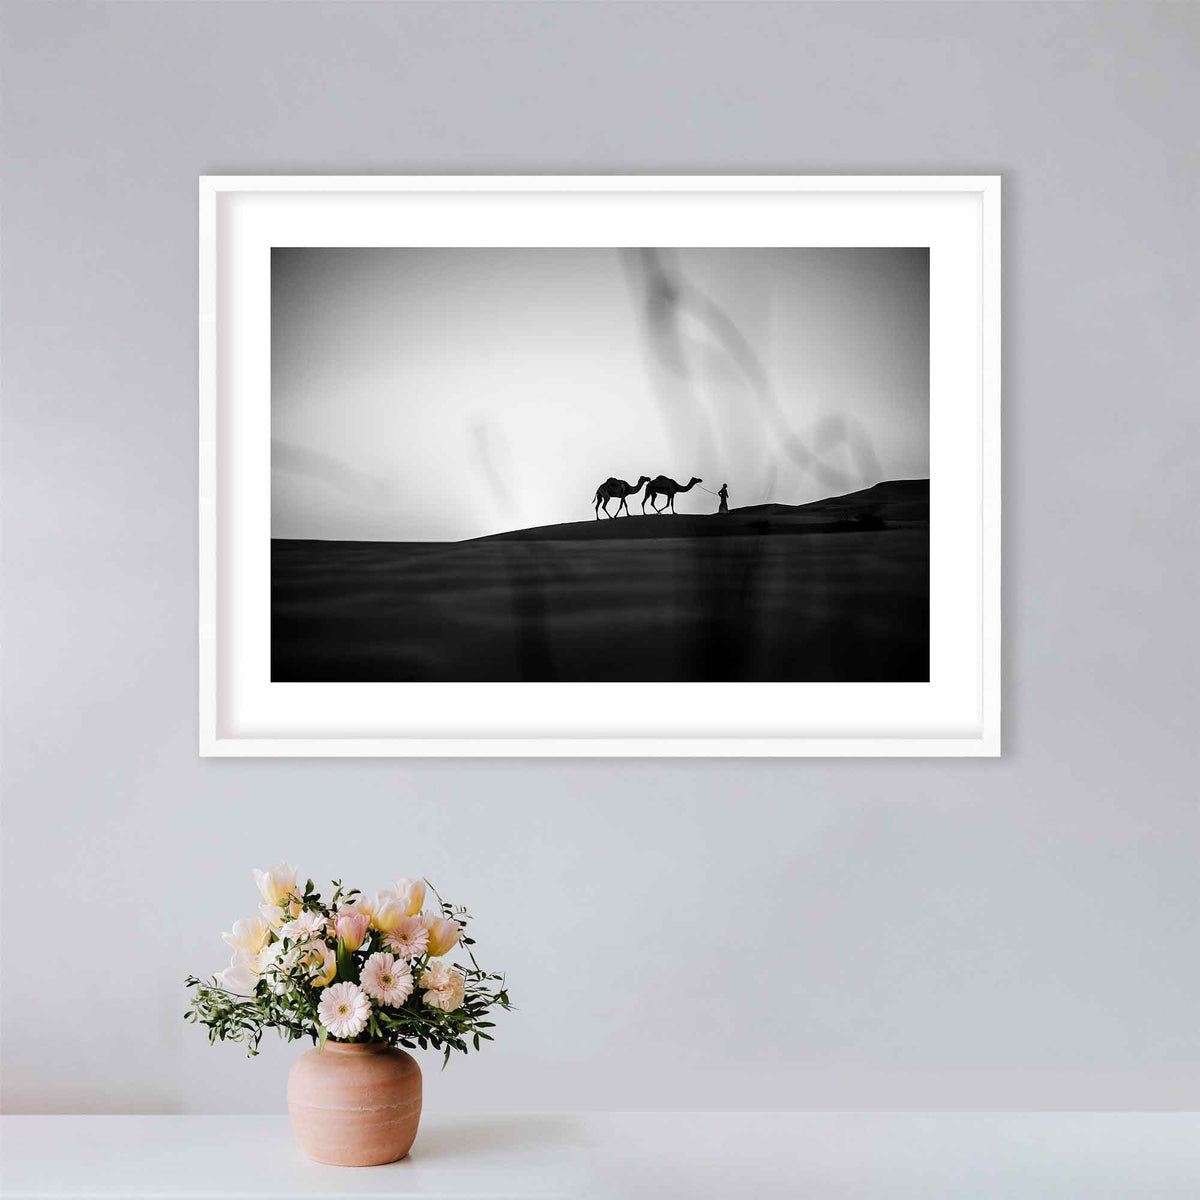 before the storm - limited edition prints